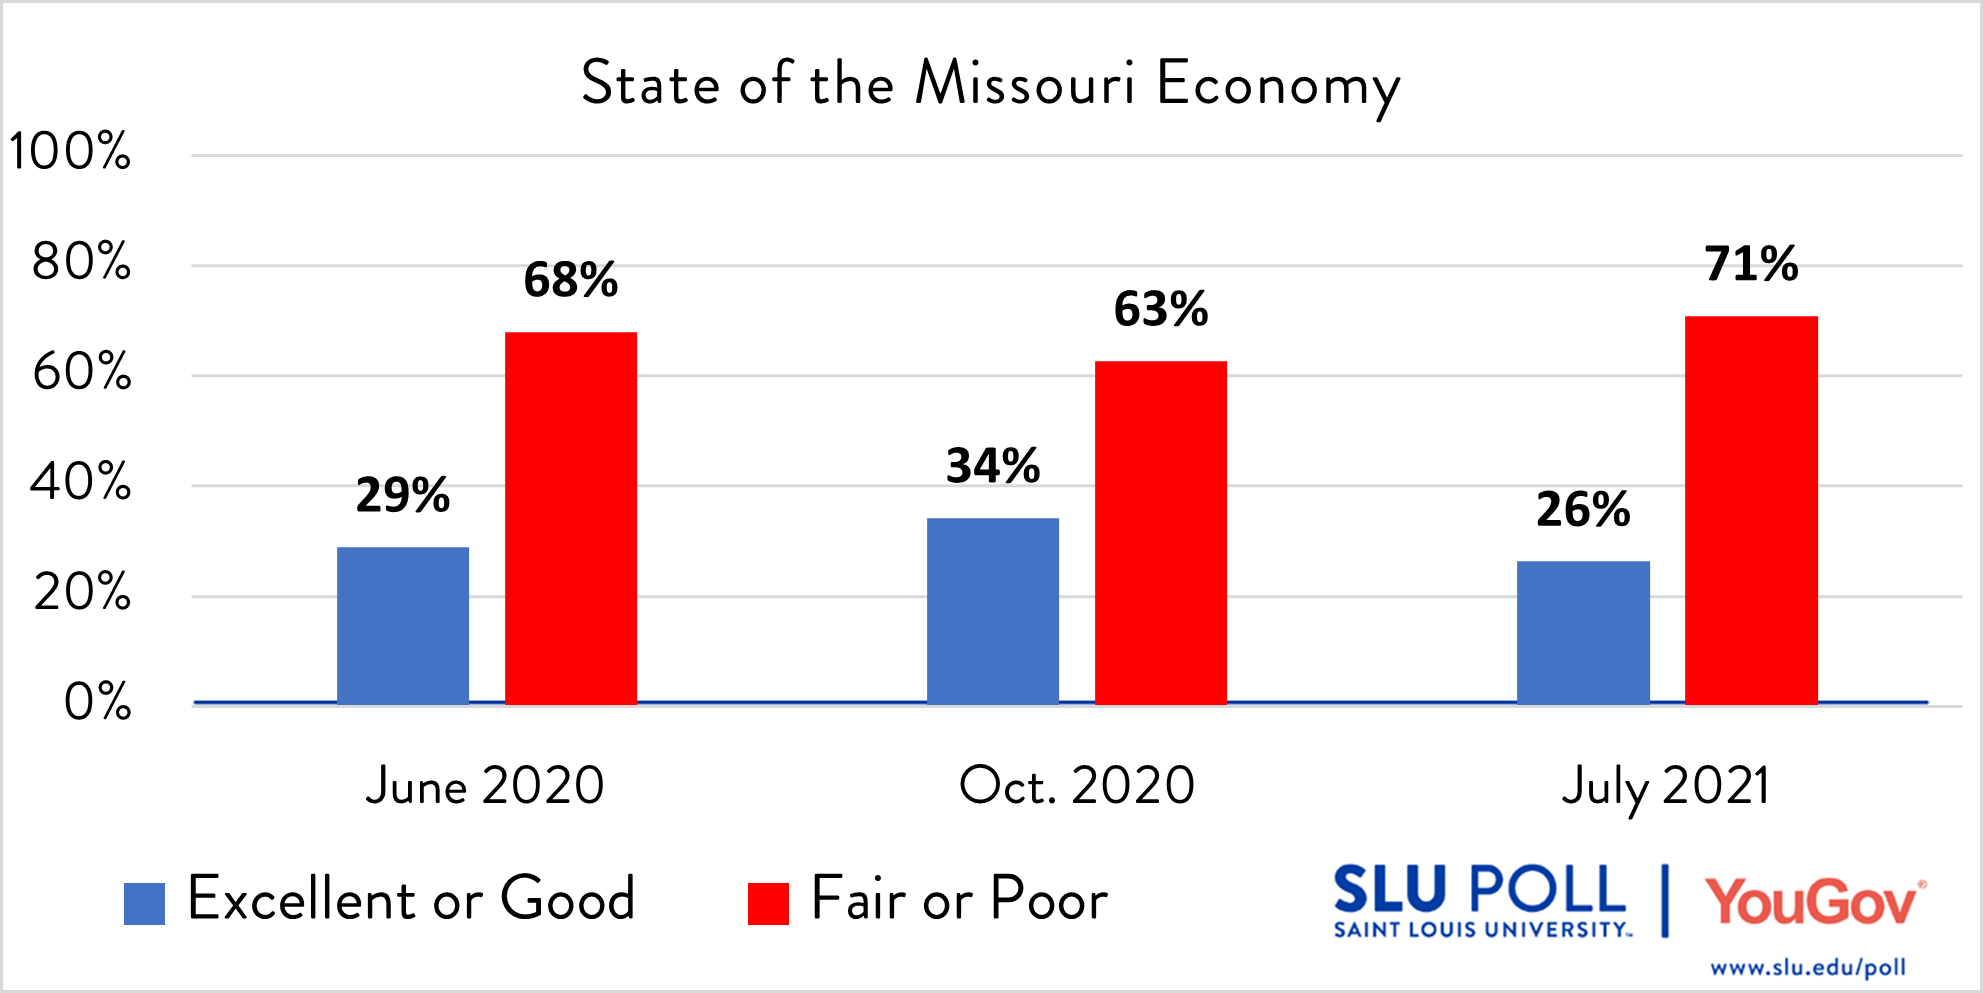 How would you rate the following…The Economy in the State of Missouri?  - Excellent: 2% - Good: 24% - Fair: 50% - Poor: 21% - Not sure: 3%